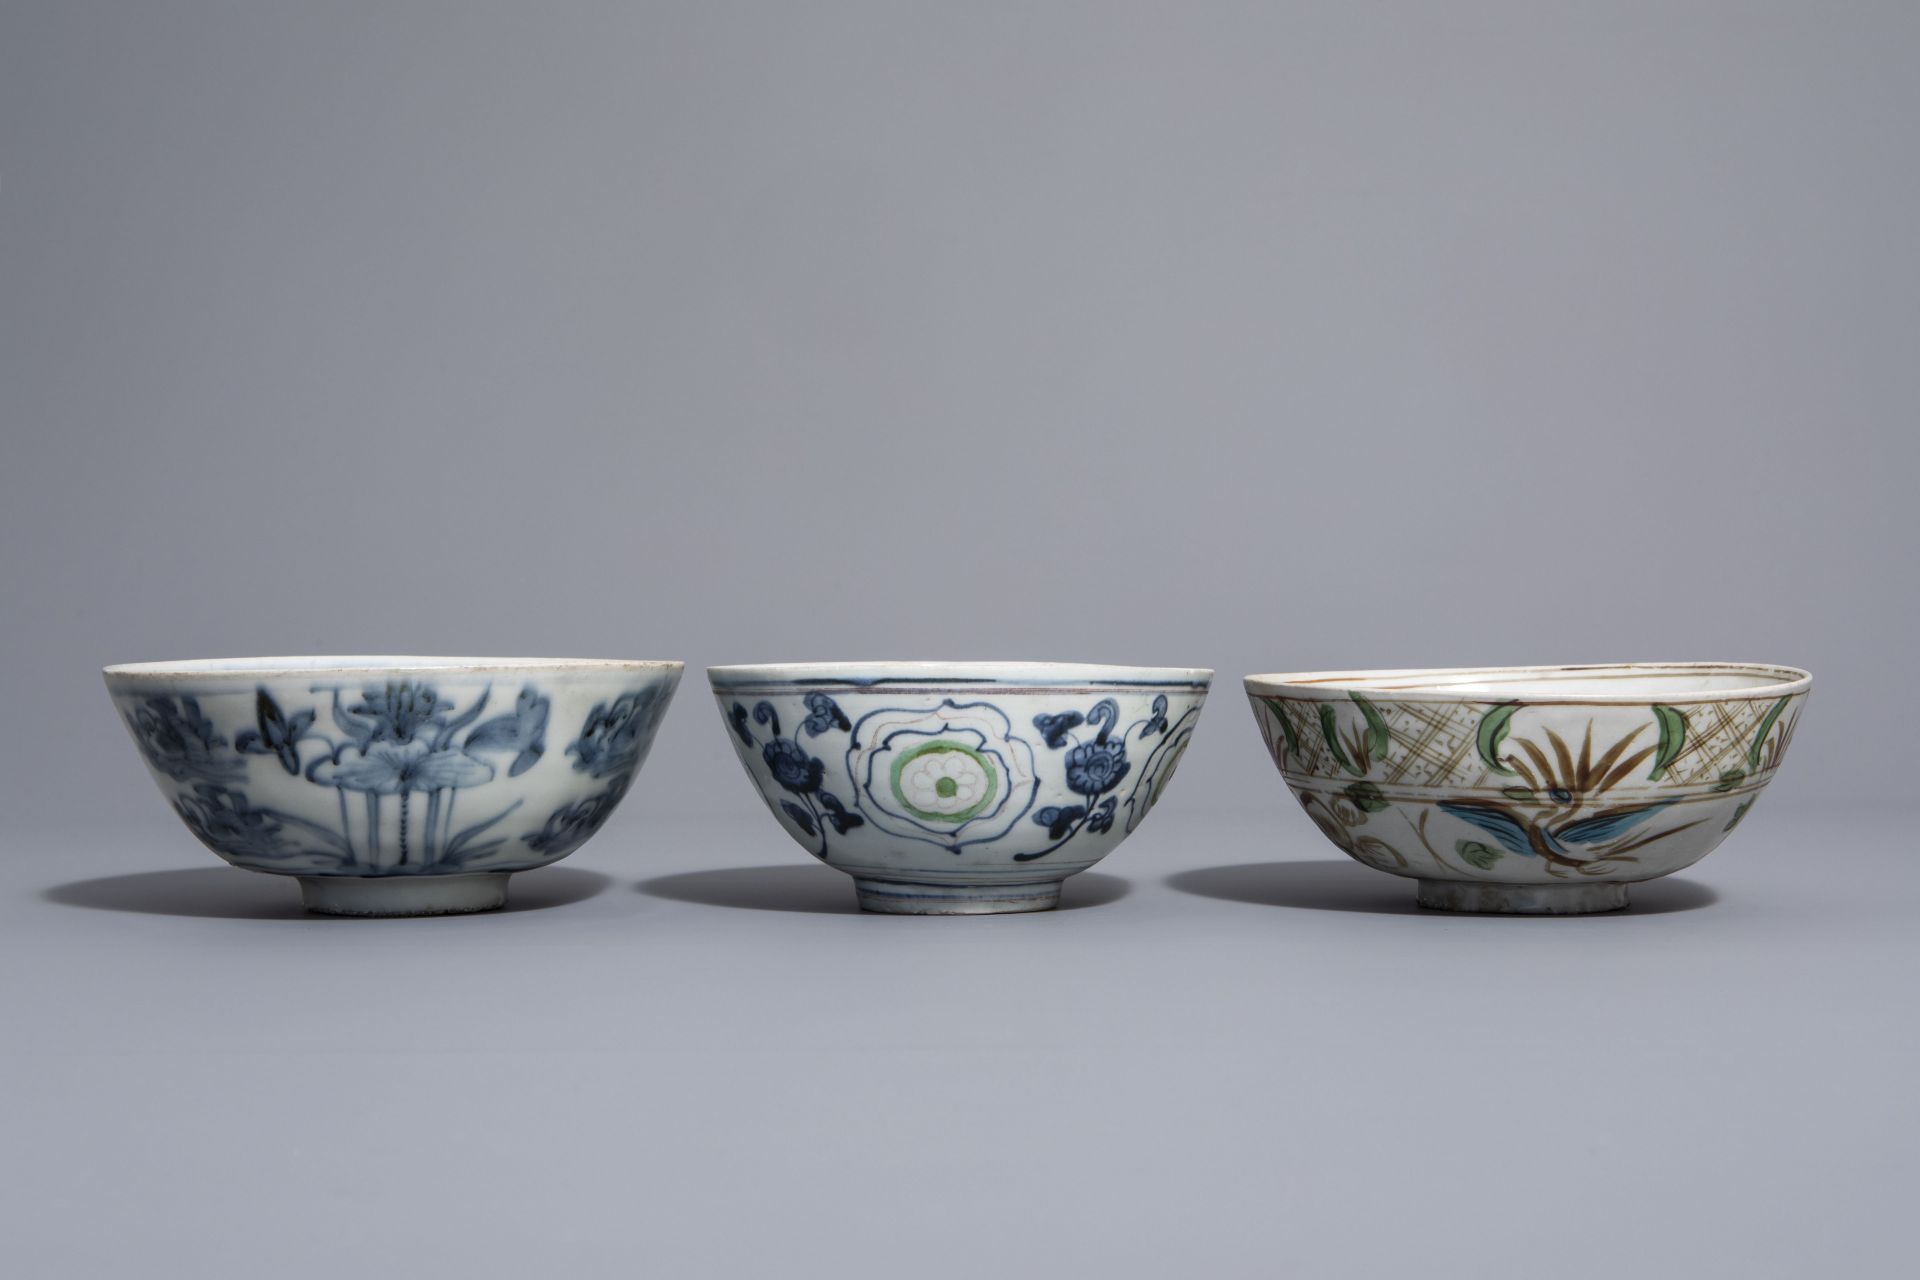 Three Chinese blue, white and polychrome Swatow bowls with different designs, 17th C. - Image 2 of 7